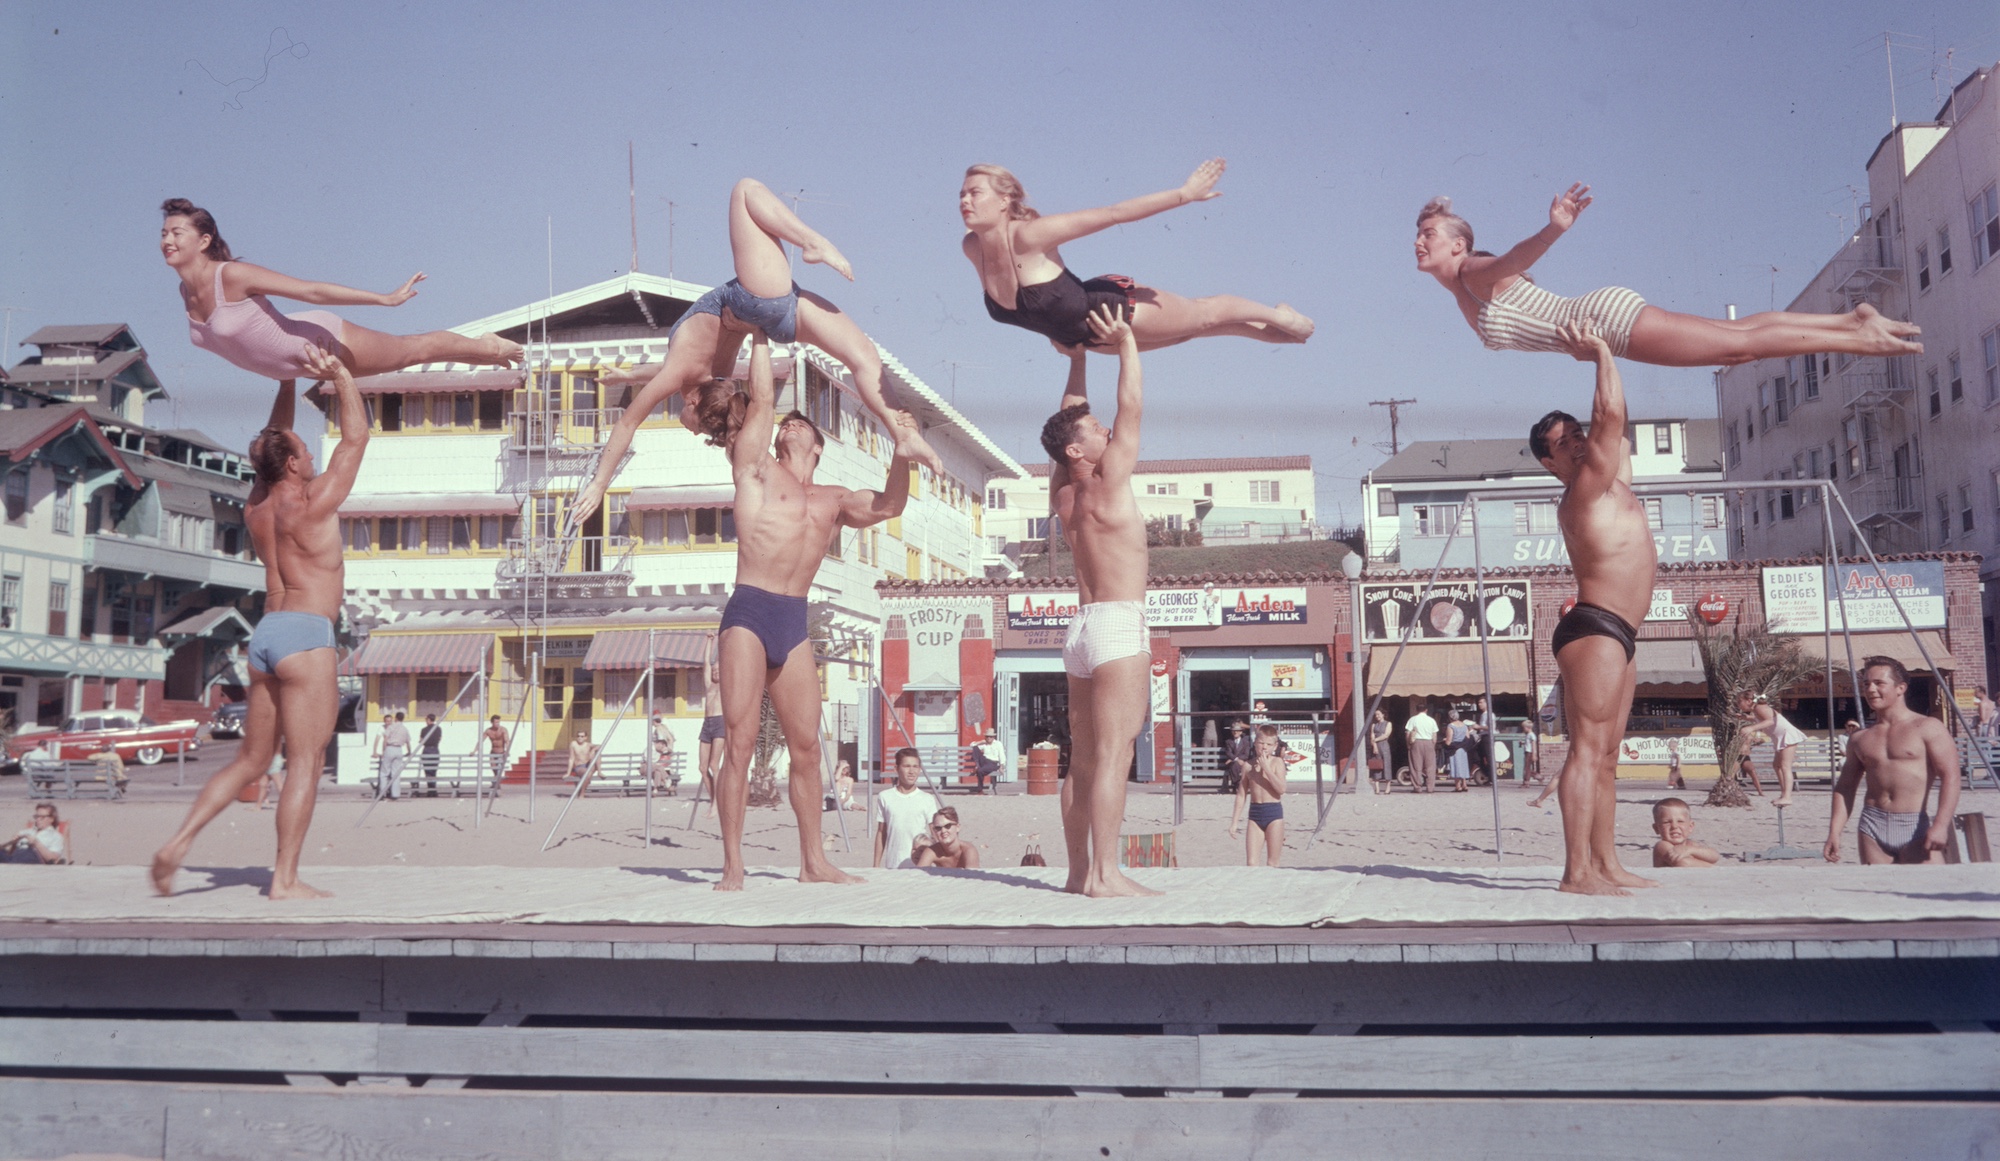 1956: EXCLUSIVE Full-length image of stunt performers on Muscle Beach, Santa Monica, California. Four men lift four women in the air, all in bathing suits, on the boardwalk stage. (Photo by Gene Lester/Getty Images)